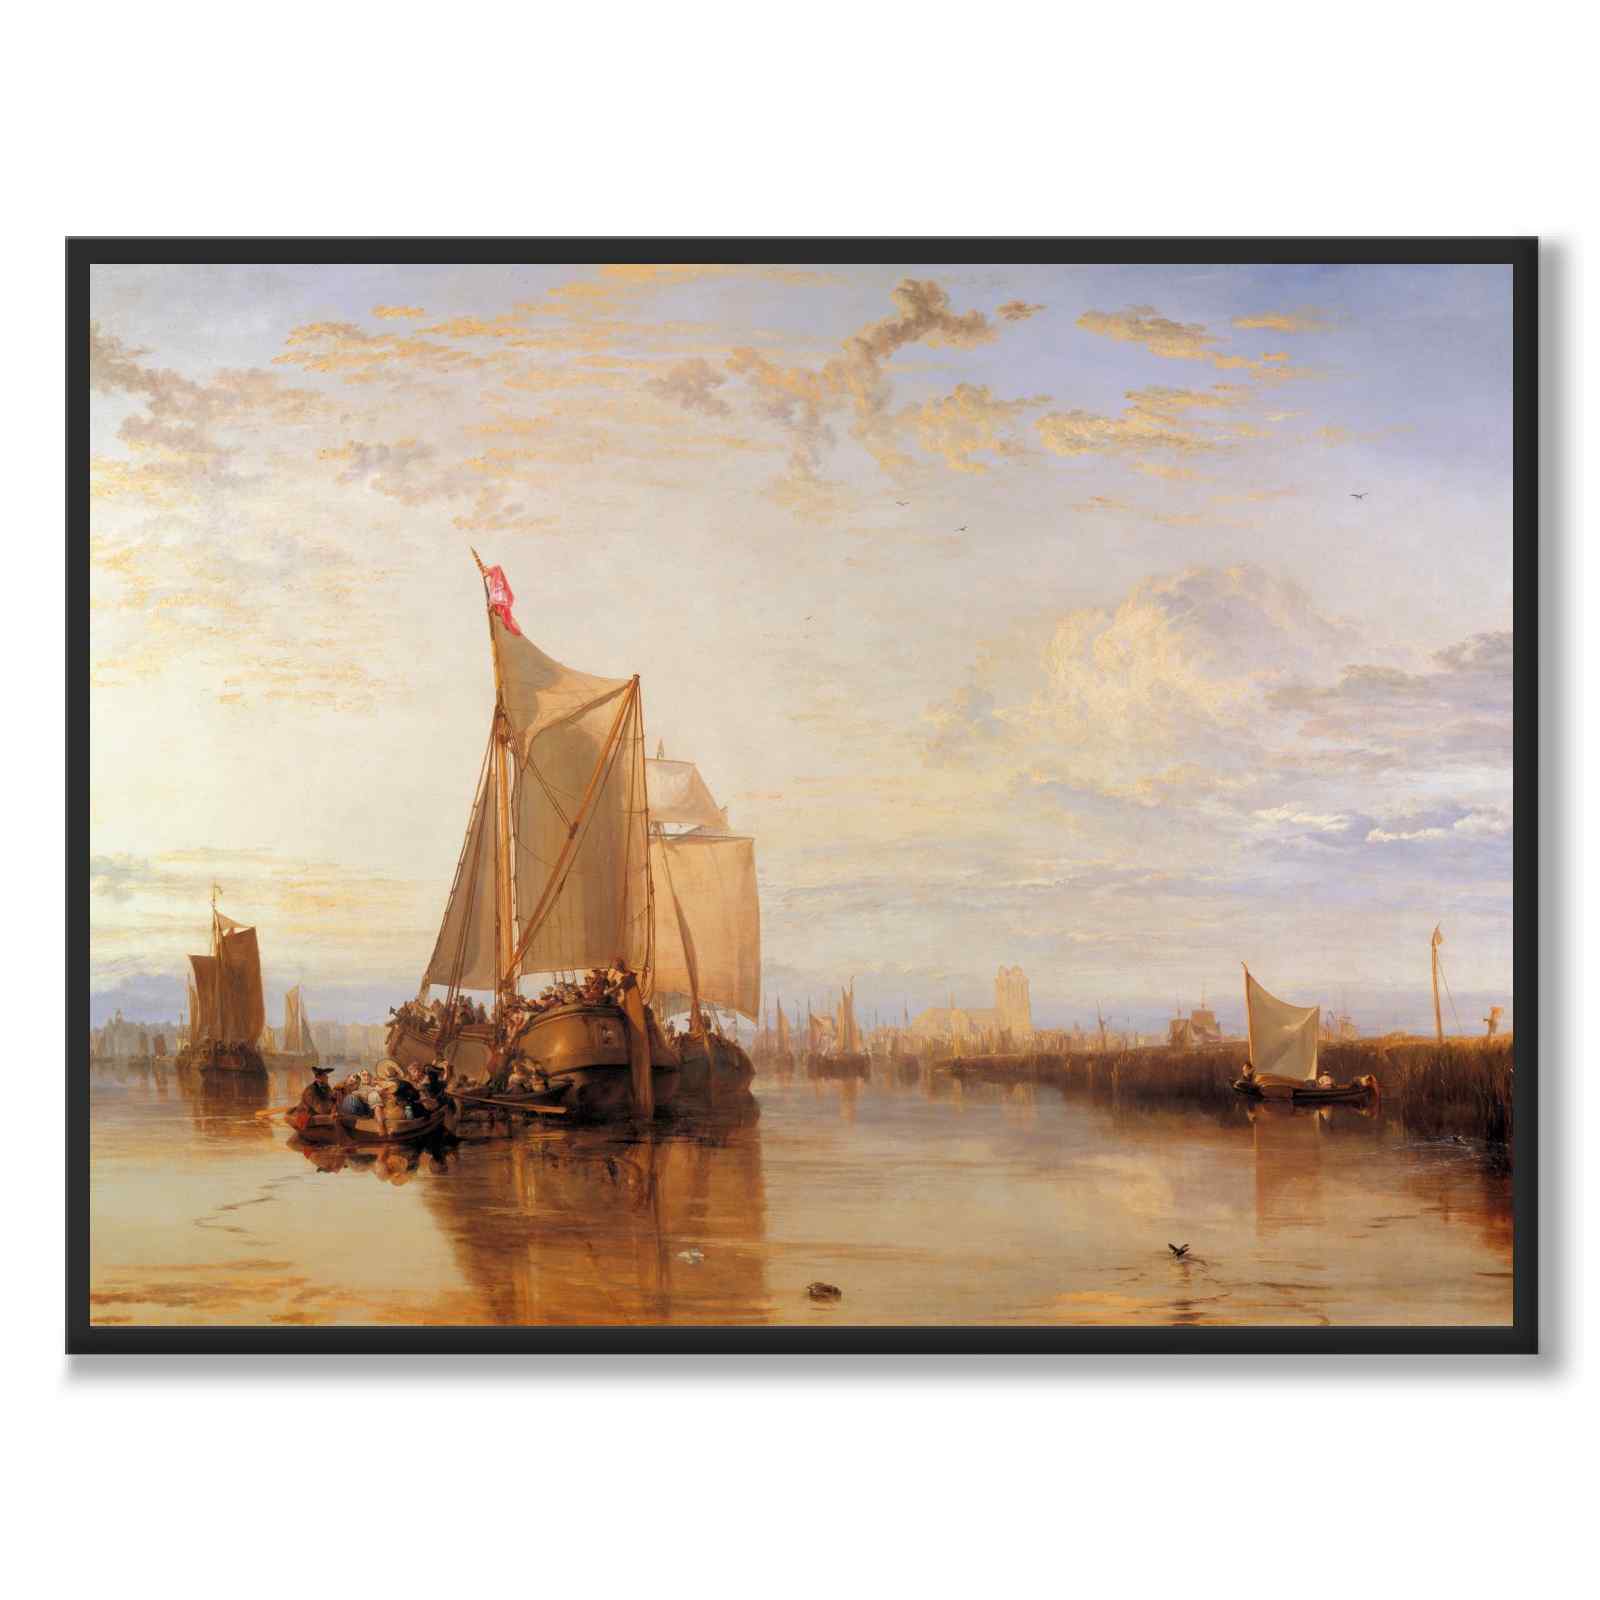 The Dort Packet-Boat from Rotterdam Becalmed - Poster